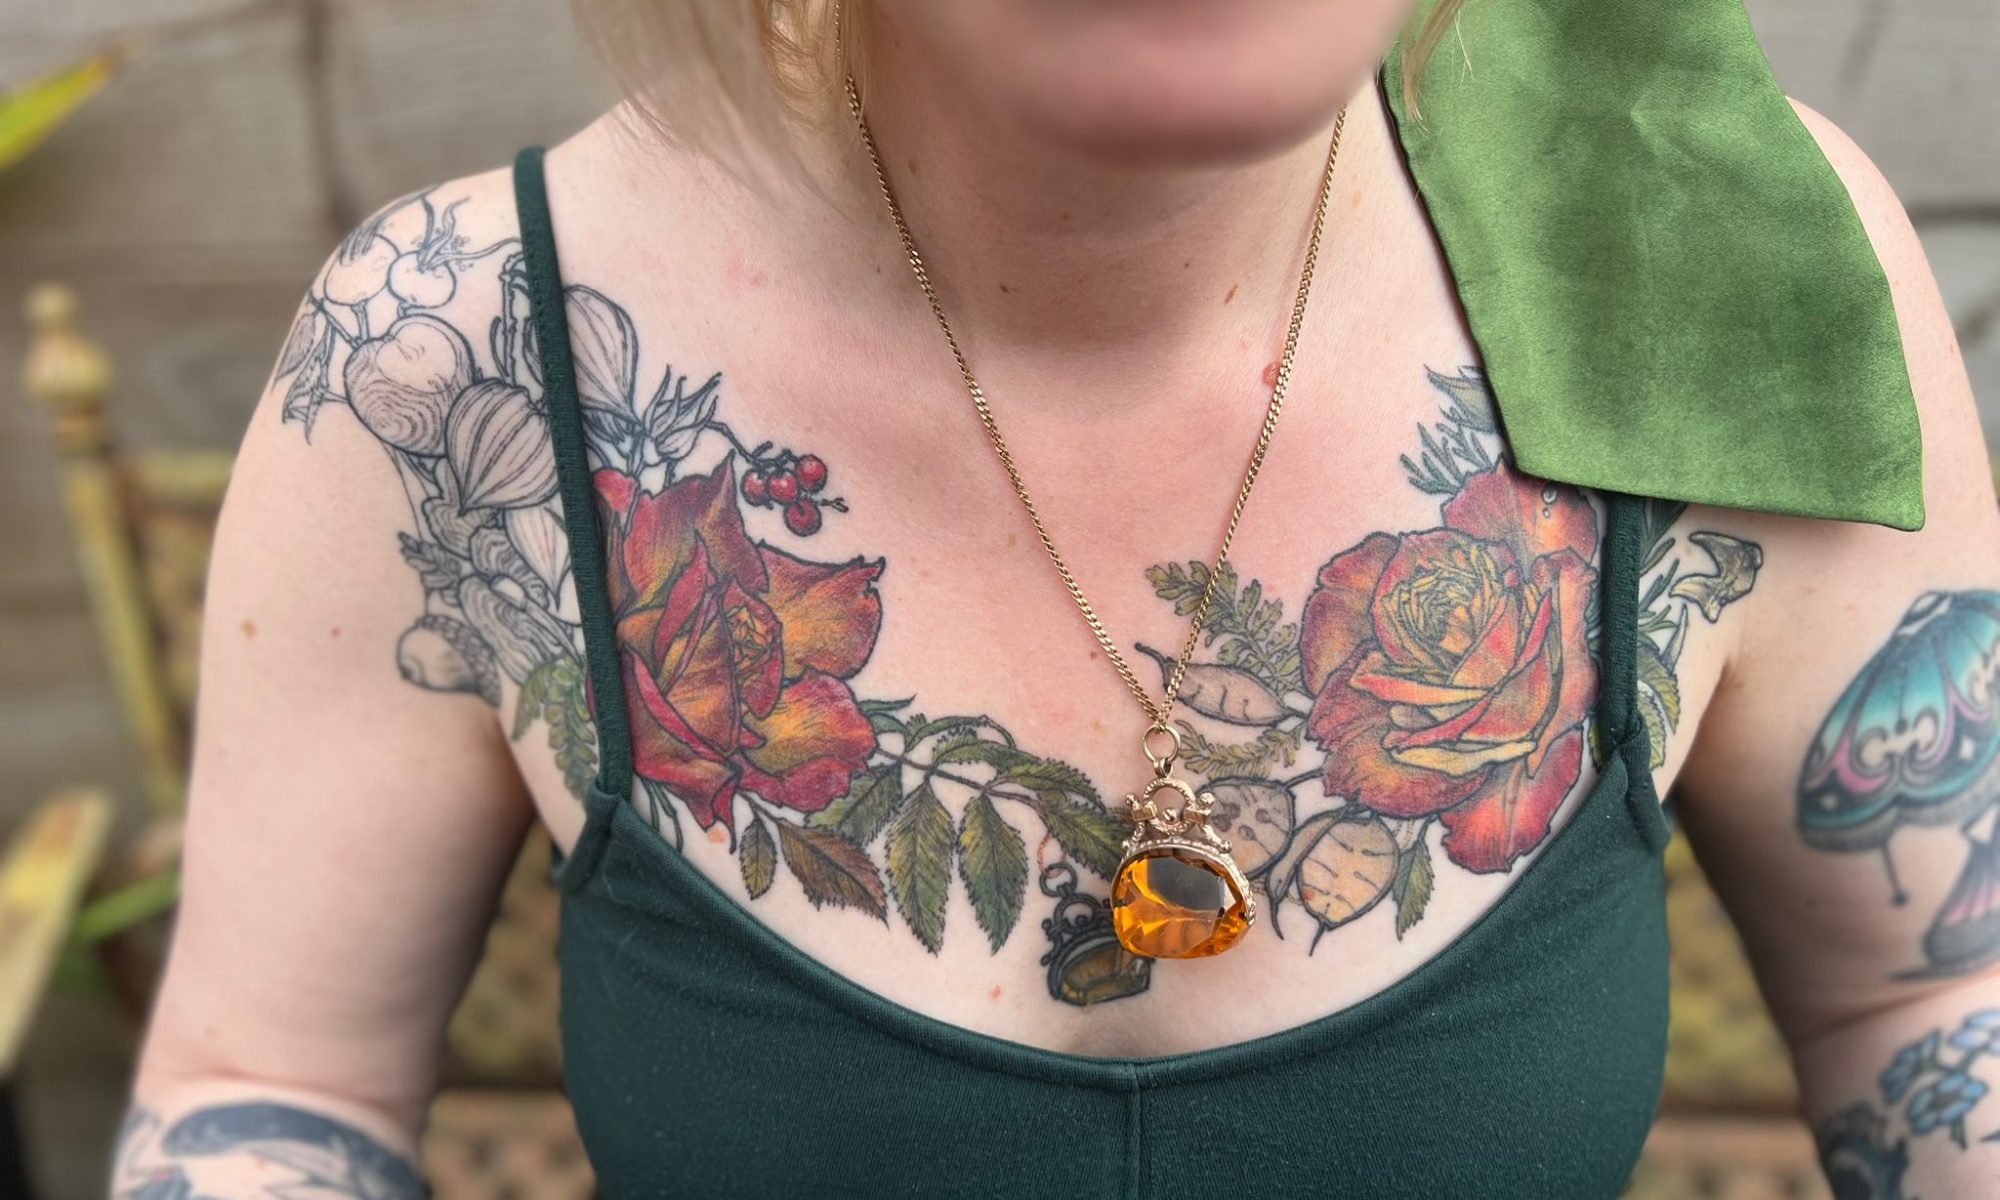 What To Wear When Getting a Chest Tattoo - AuthorityTattoo